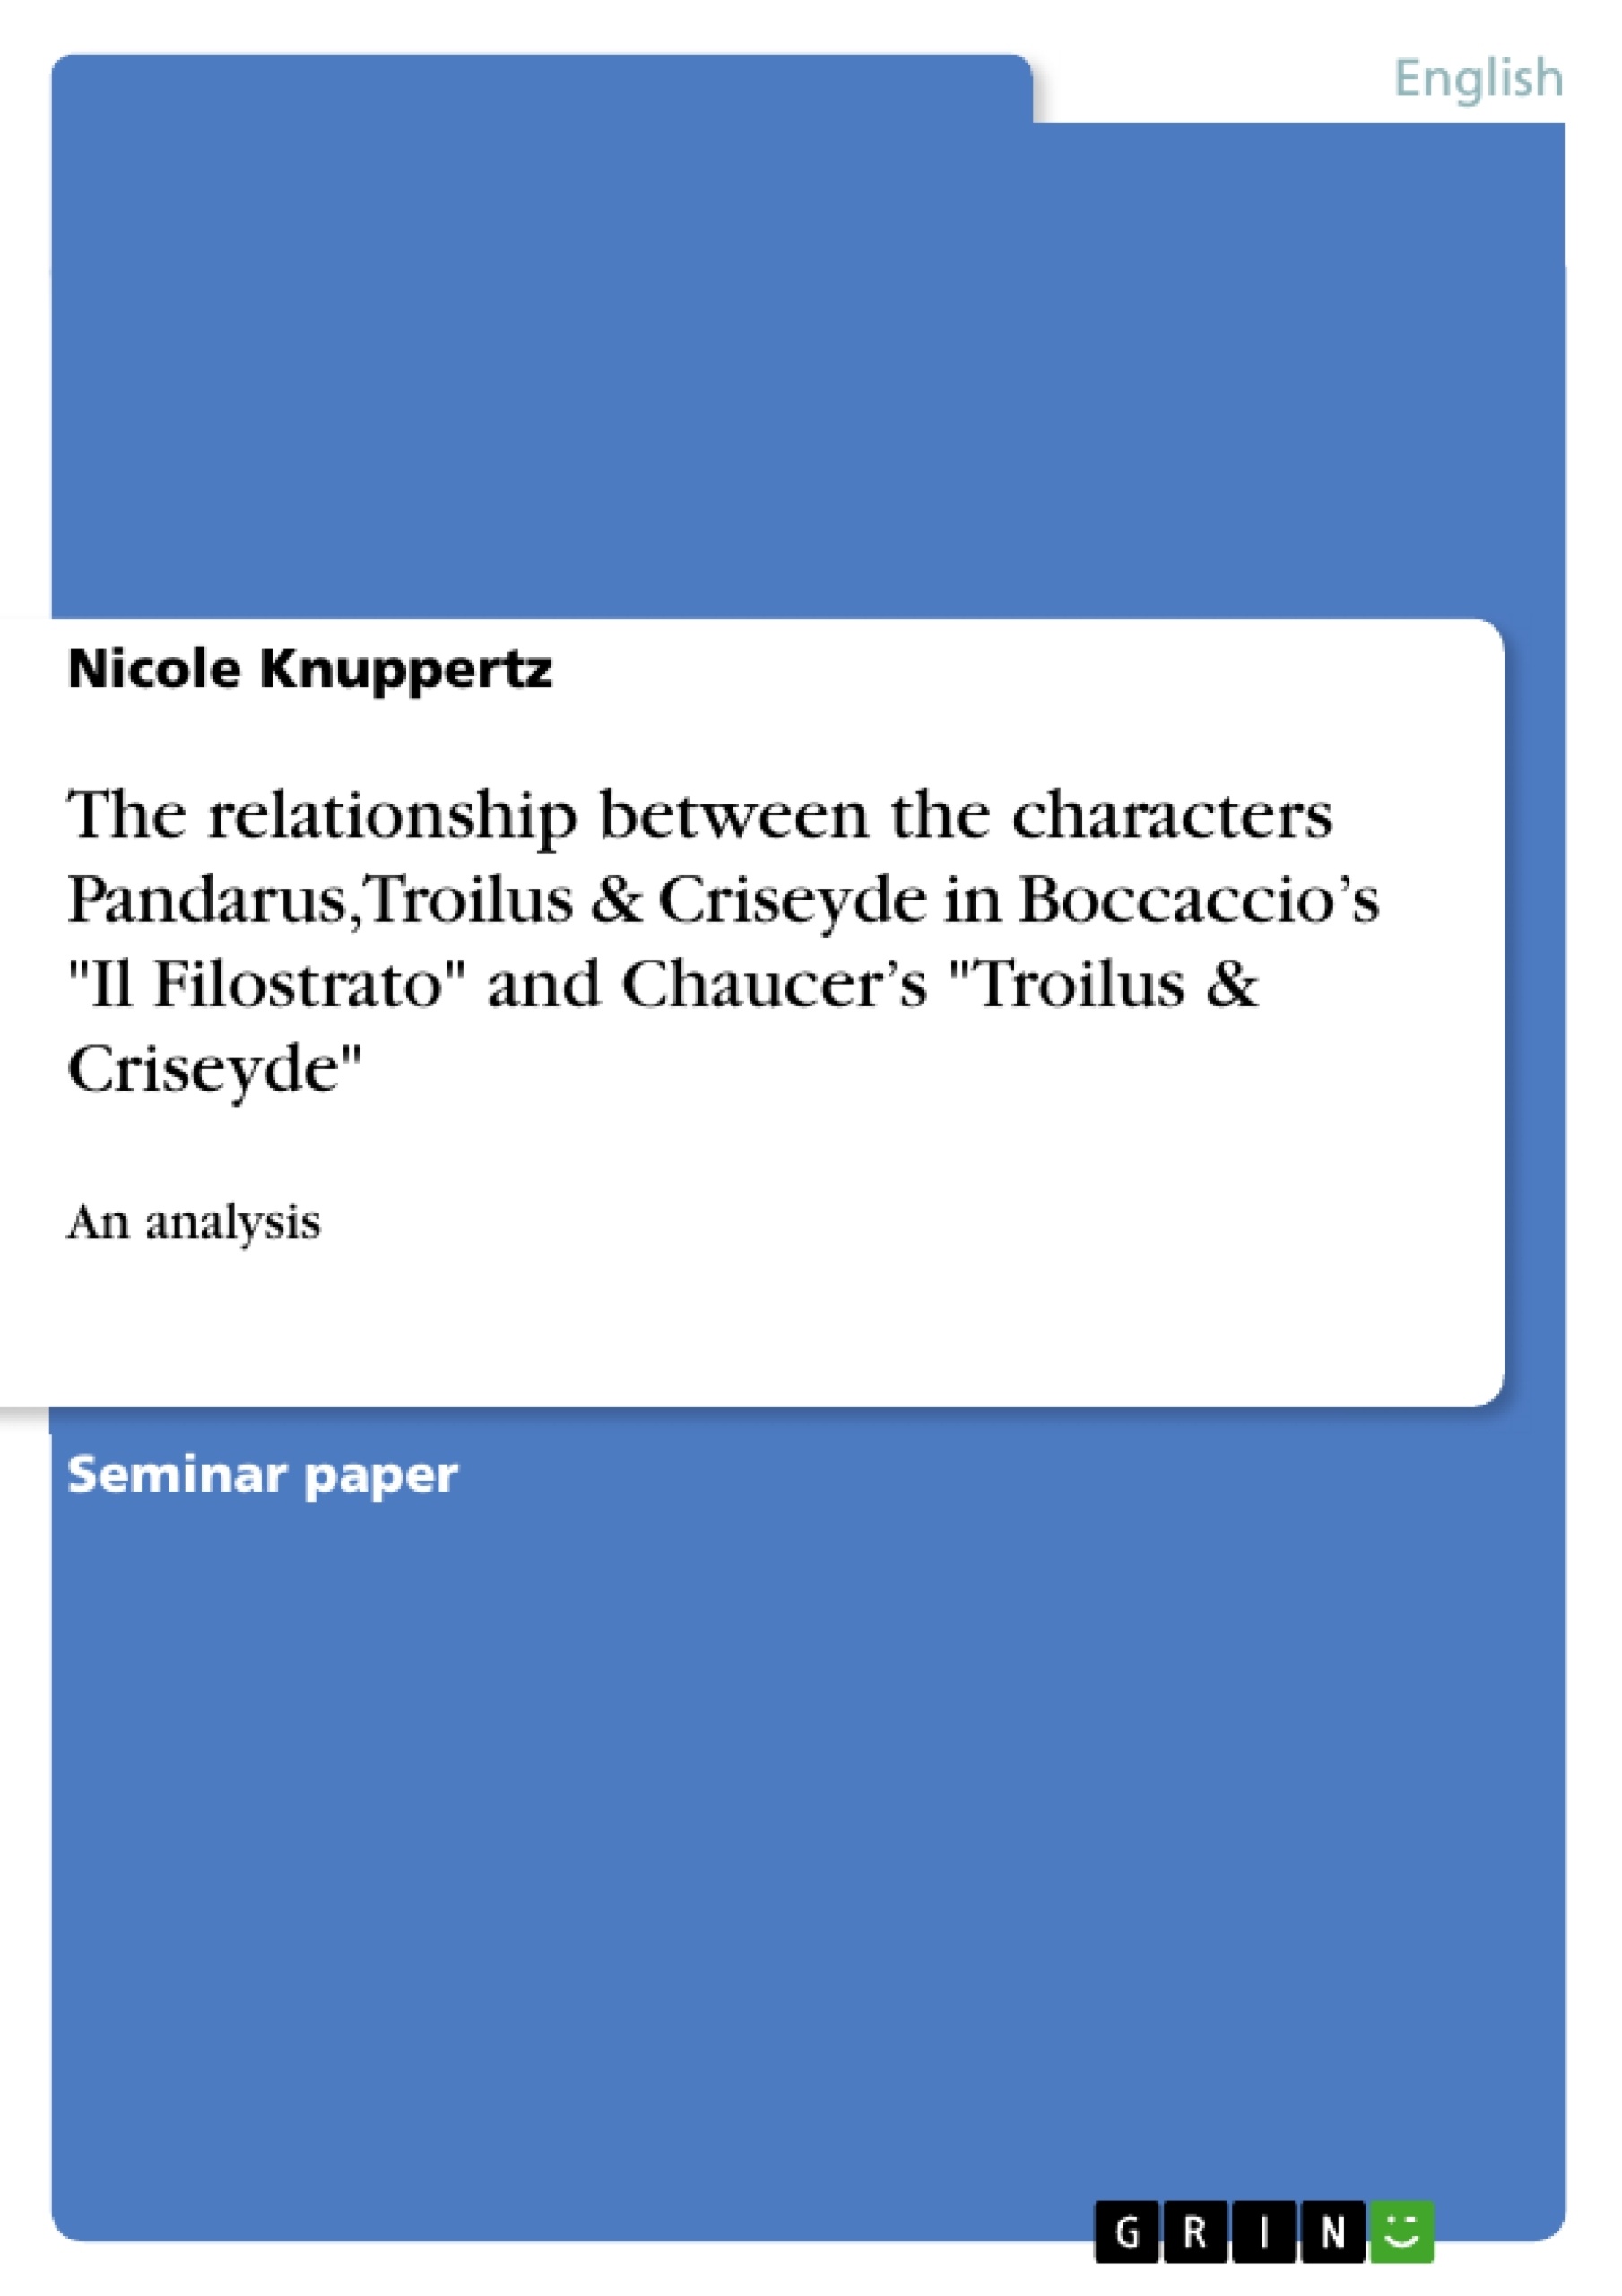 Title: The relationship between the characters Pandarus, Troilus & Criseyde in Boccaccio’s "Il Filostrato" and Chaucer’s "Troilus & Criseyde"